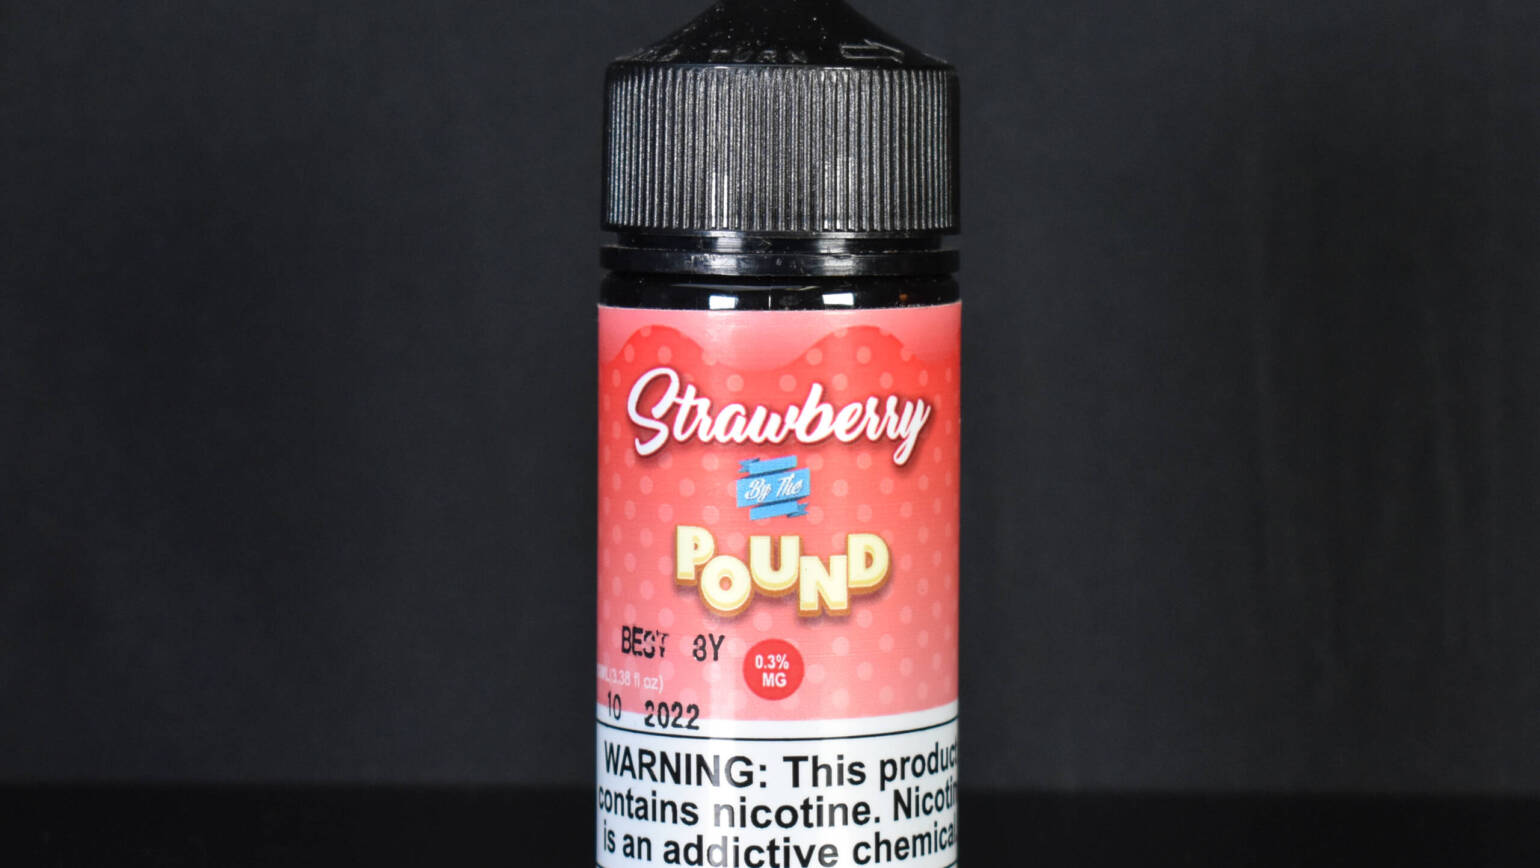 Country Clouds – Strawberry Pound